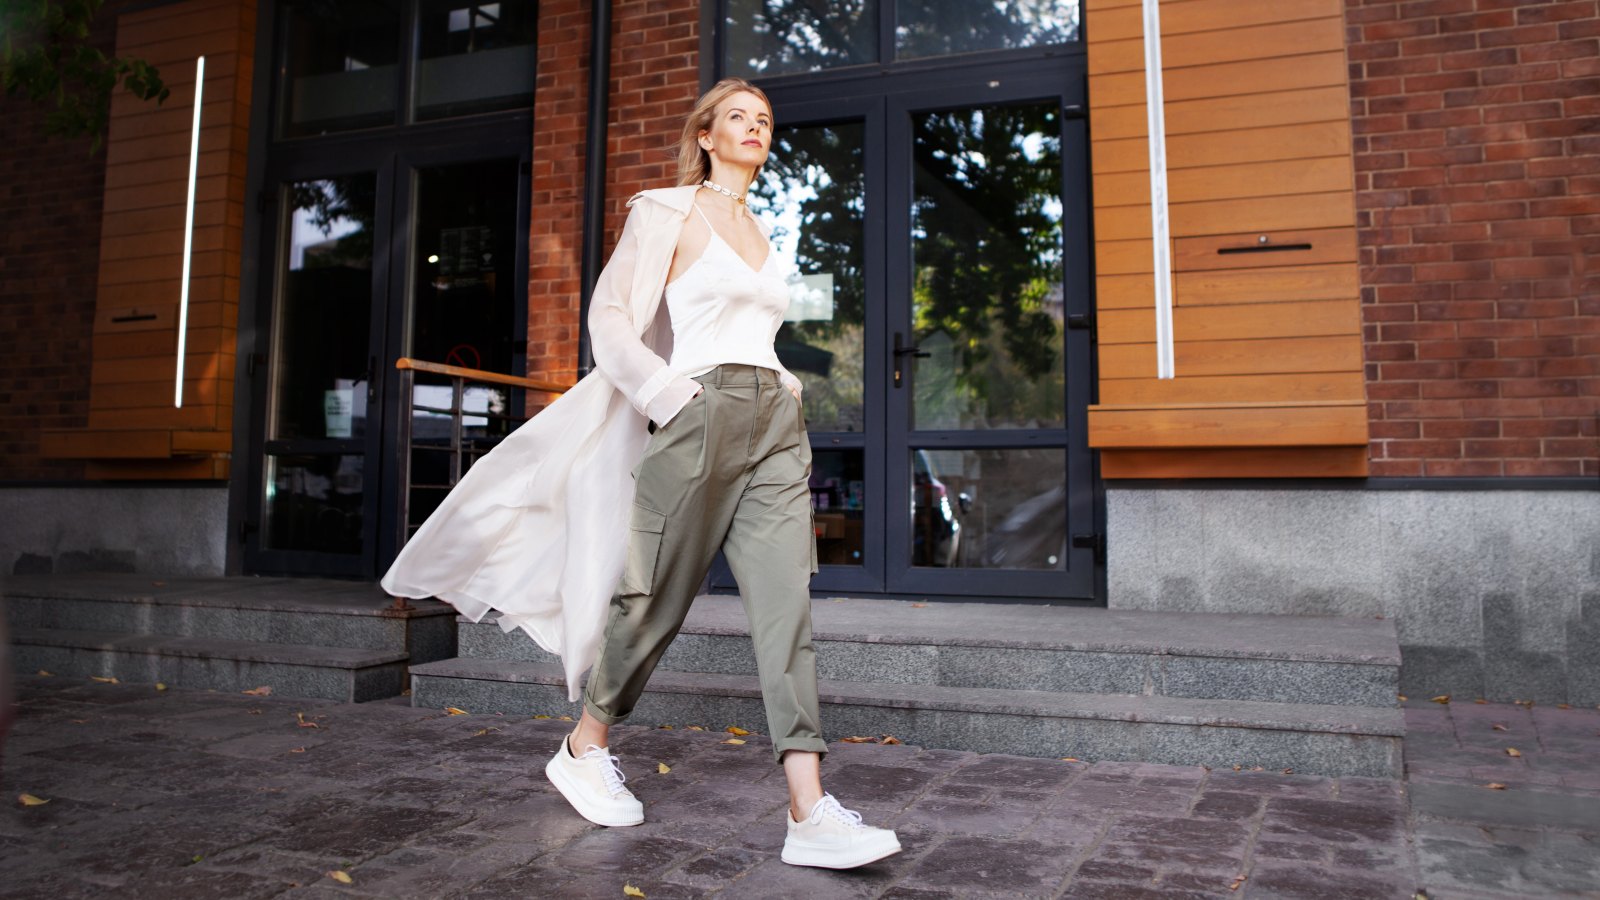 Women's joggers - with what to wear • DRESS Magazine